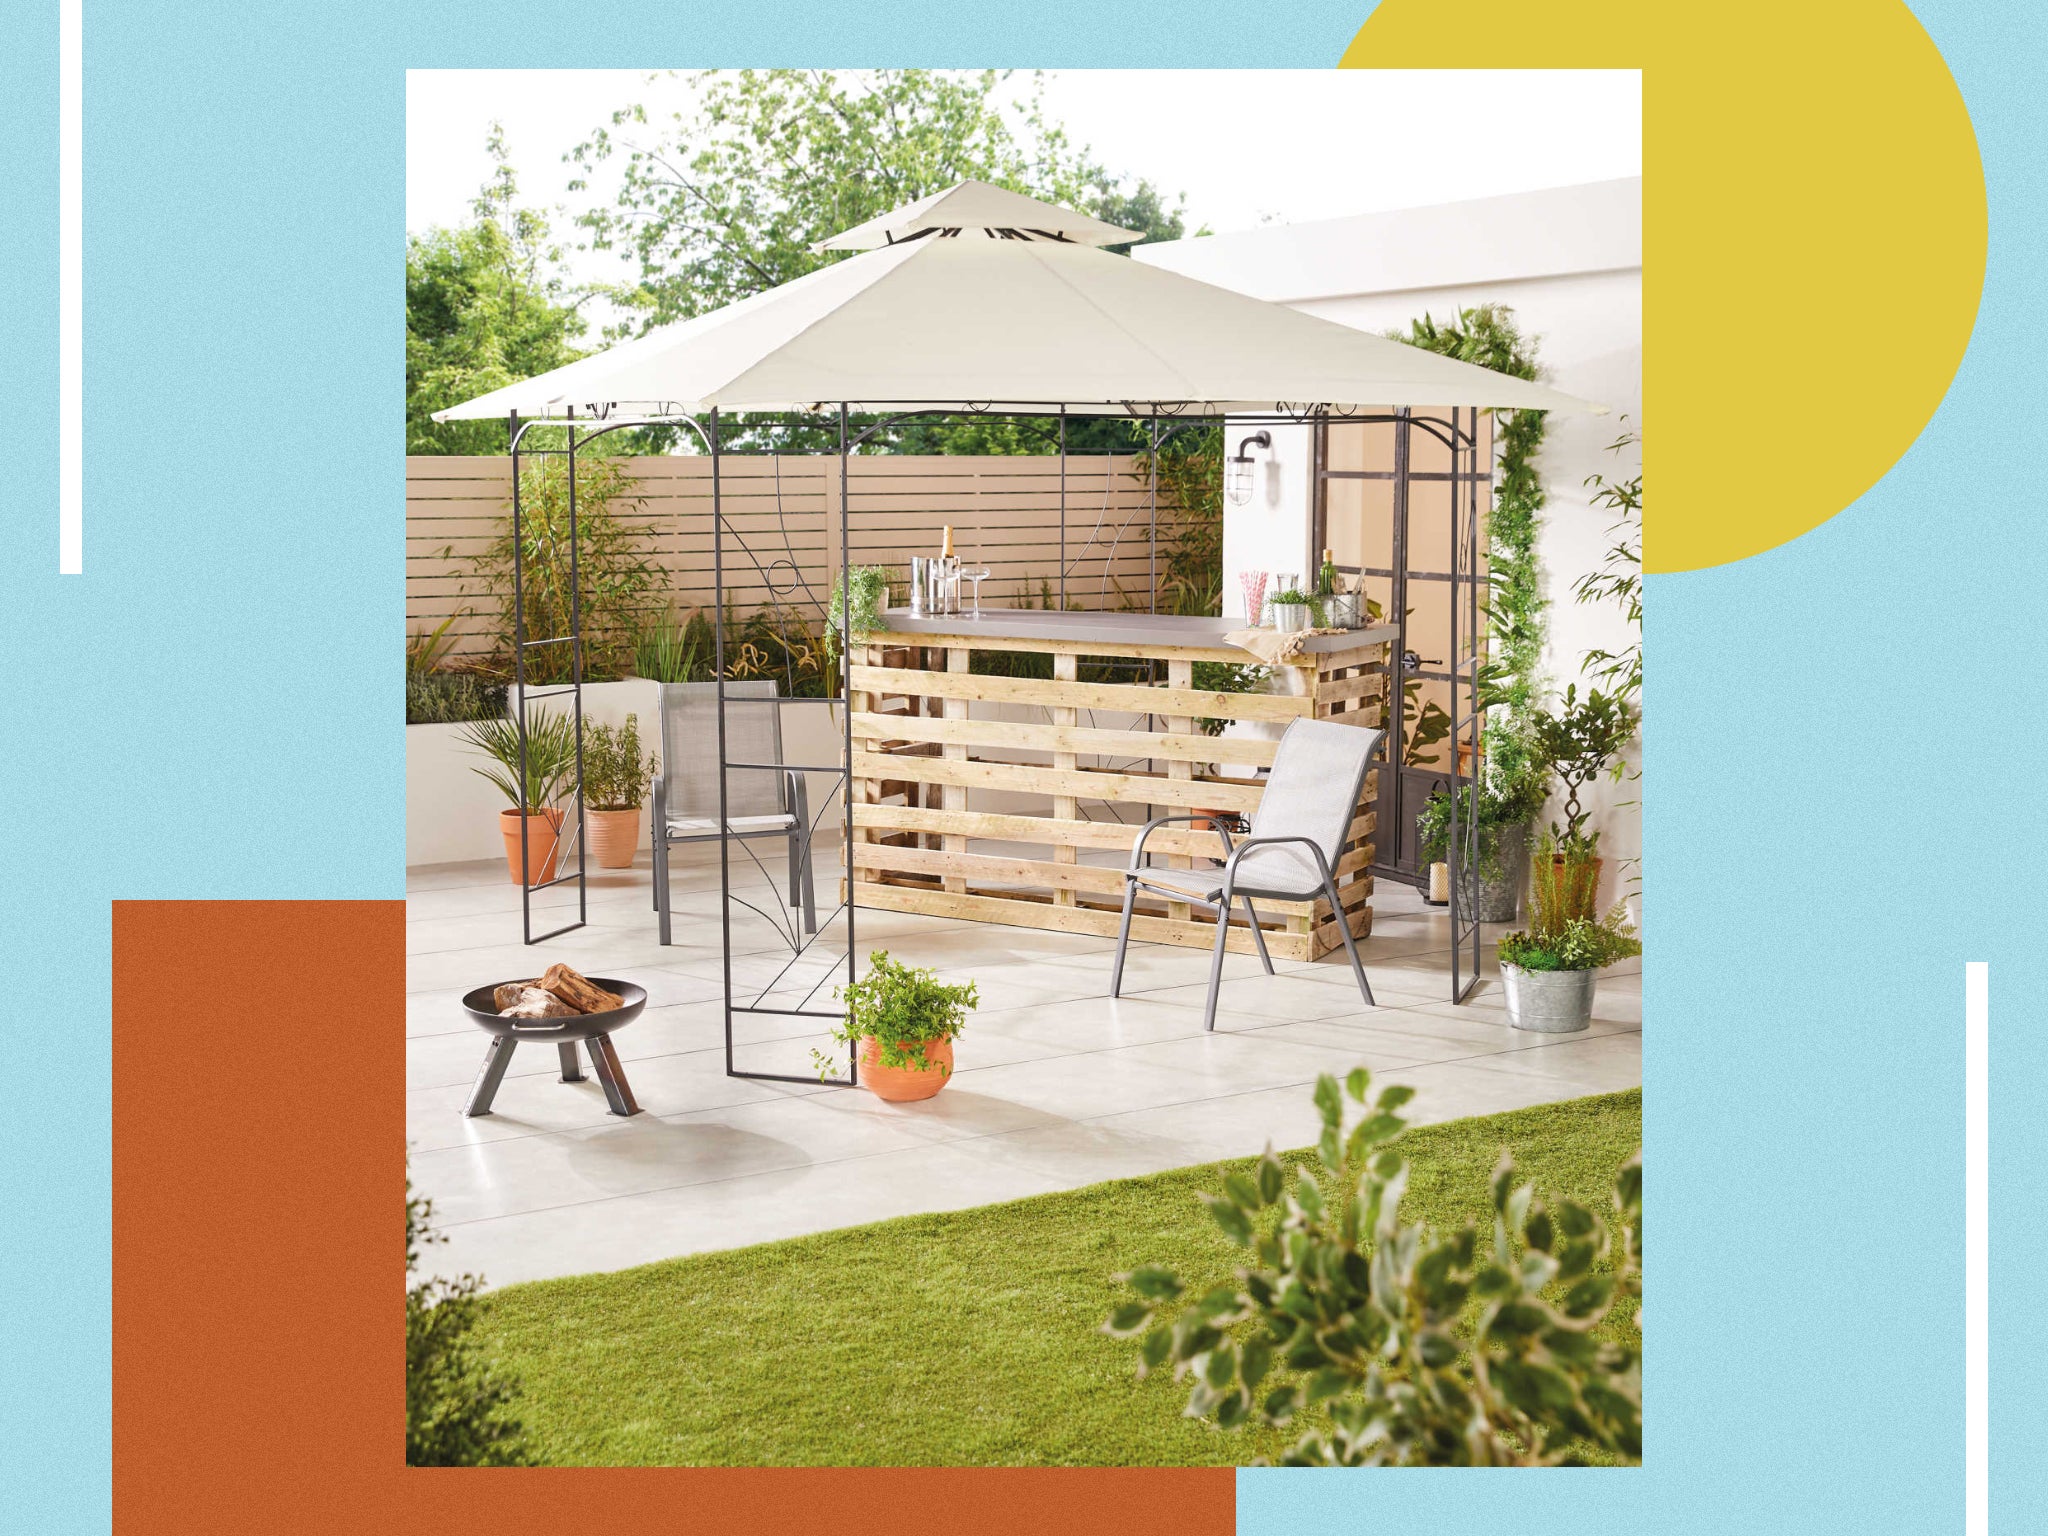 With plenty of space underneath the canopy, this is an ideal addition to your outdoor space